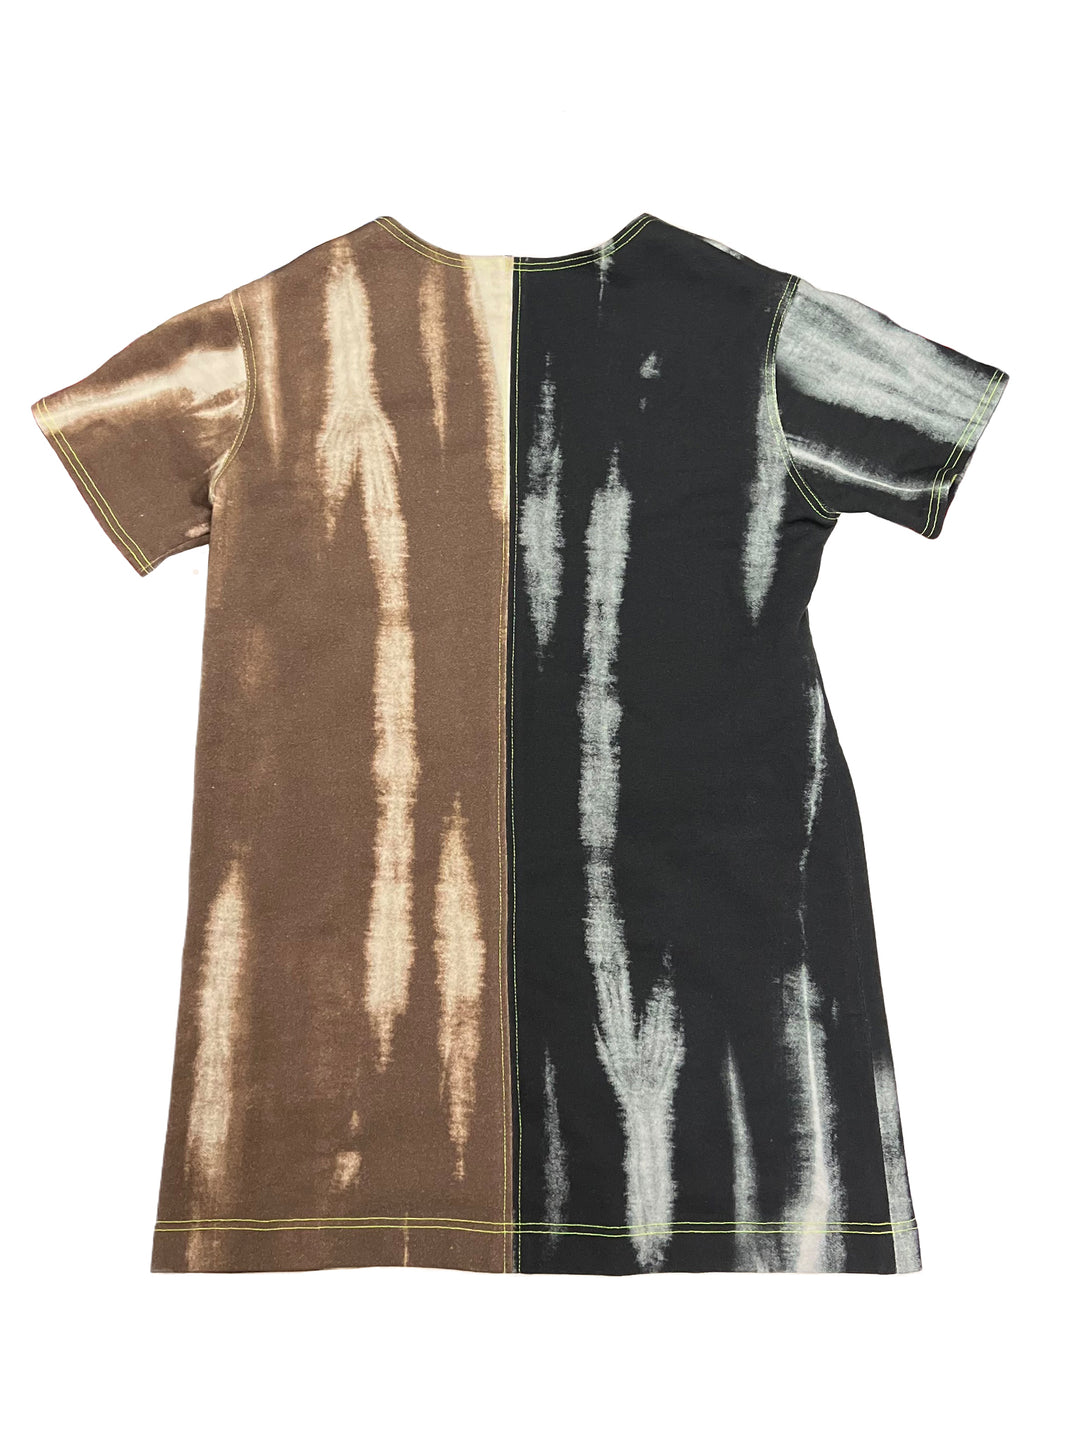 V-Neck Dress in Custom Print Color Block French Terry Cotton